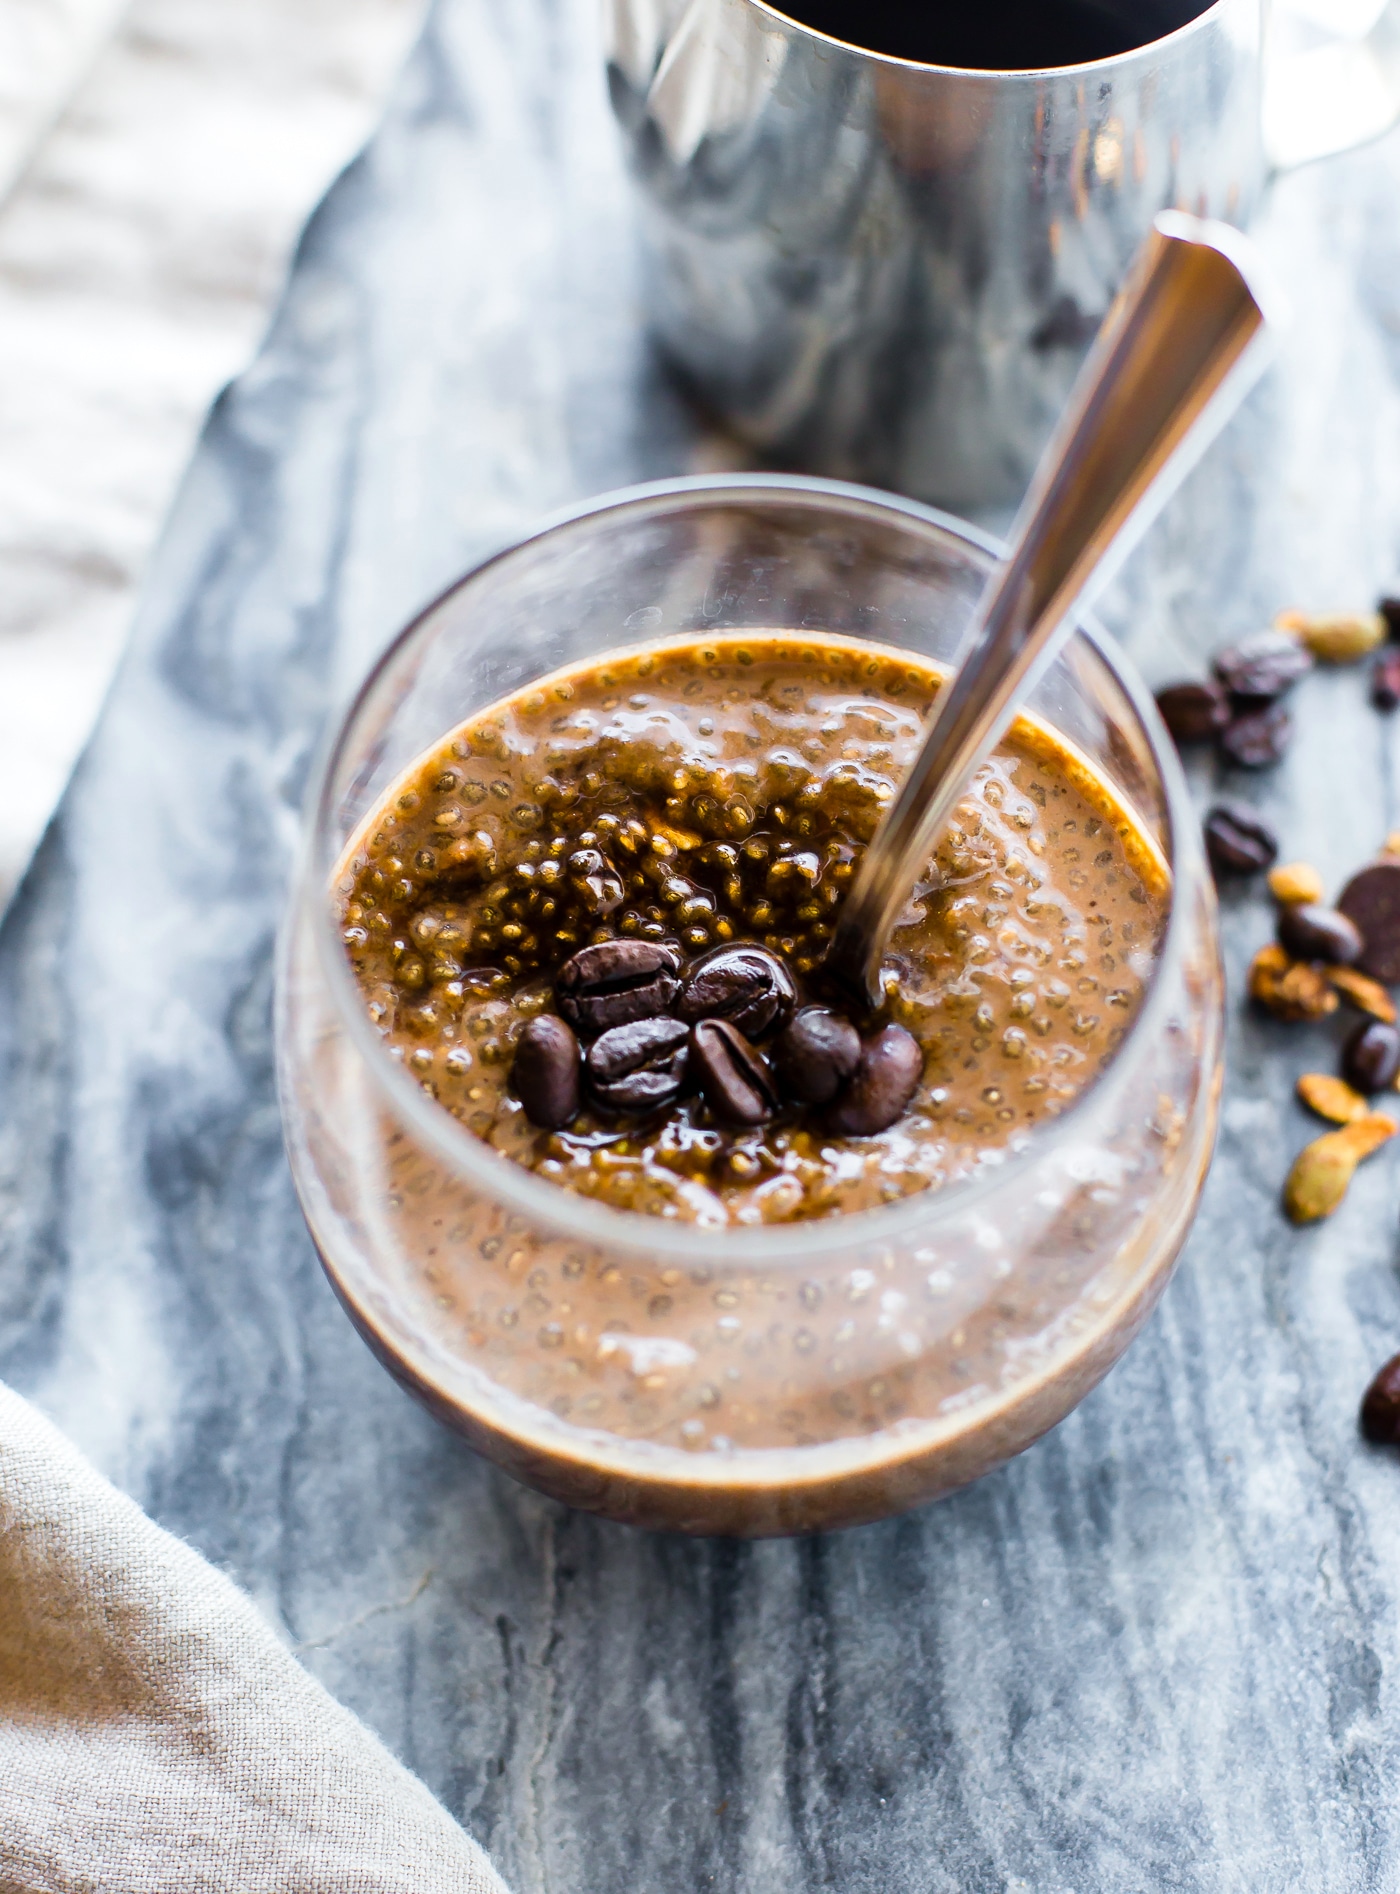 Vegan Latte Overnight Protein Chia Pudding! Delicious and healthy chia seed pudding packed with plant based protein and a kick of caffeine/coffee. This protein pudding makes for a nutrient dense breakfast that’s naturally gluten free and easy to make ahead!